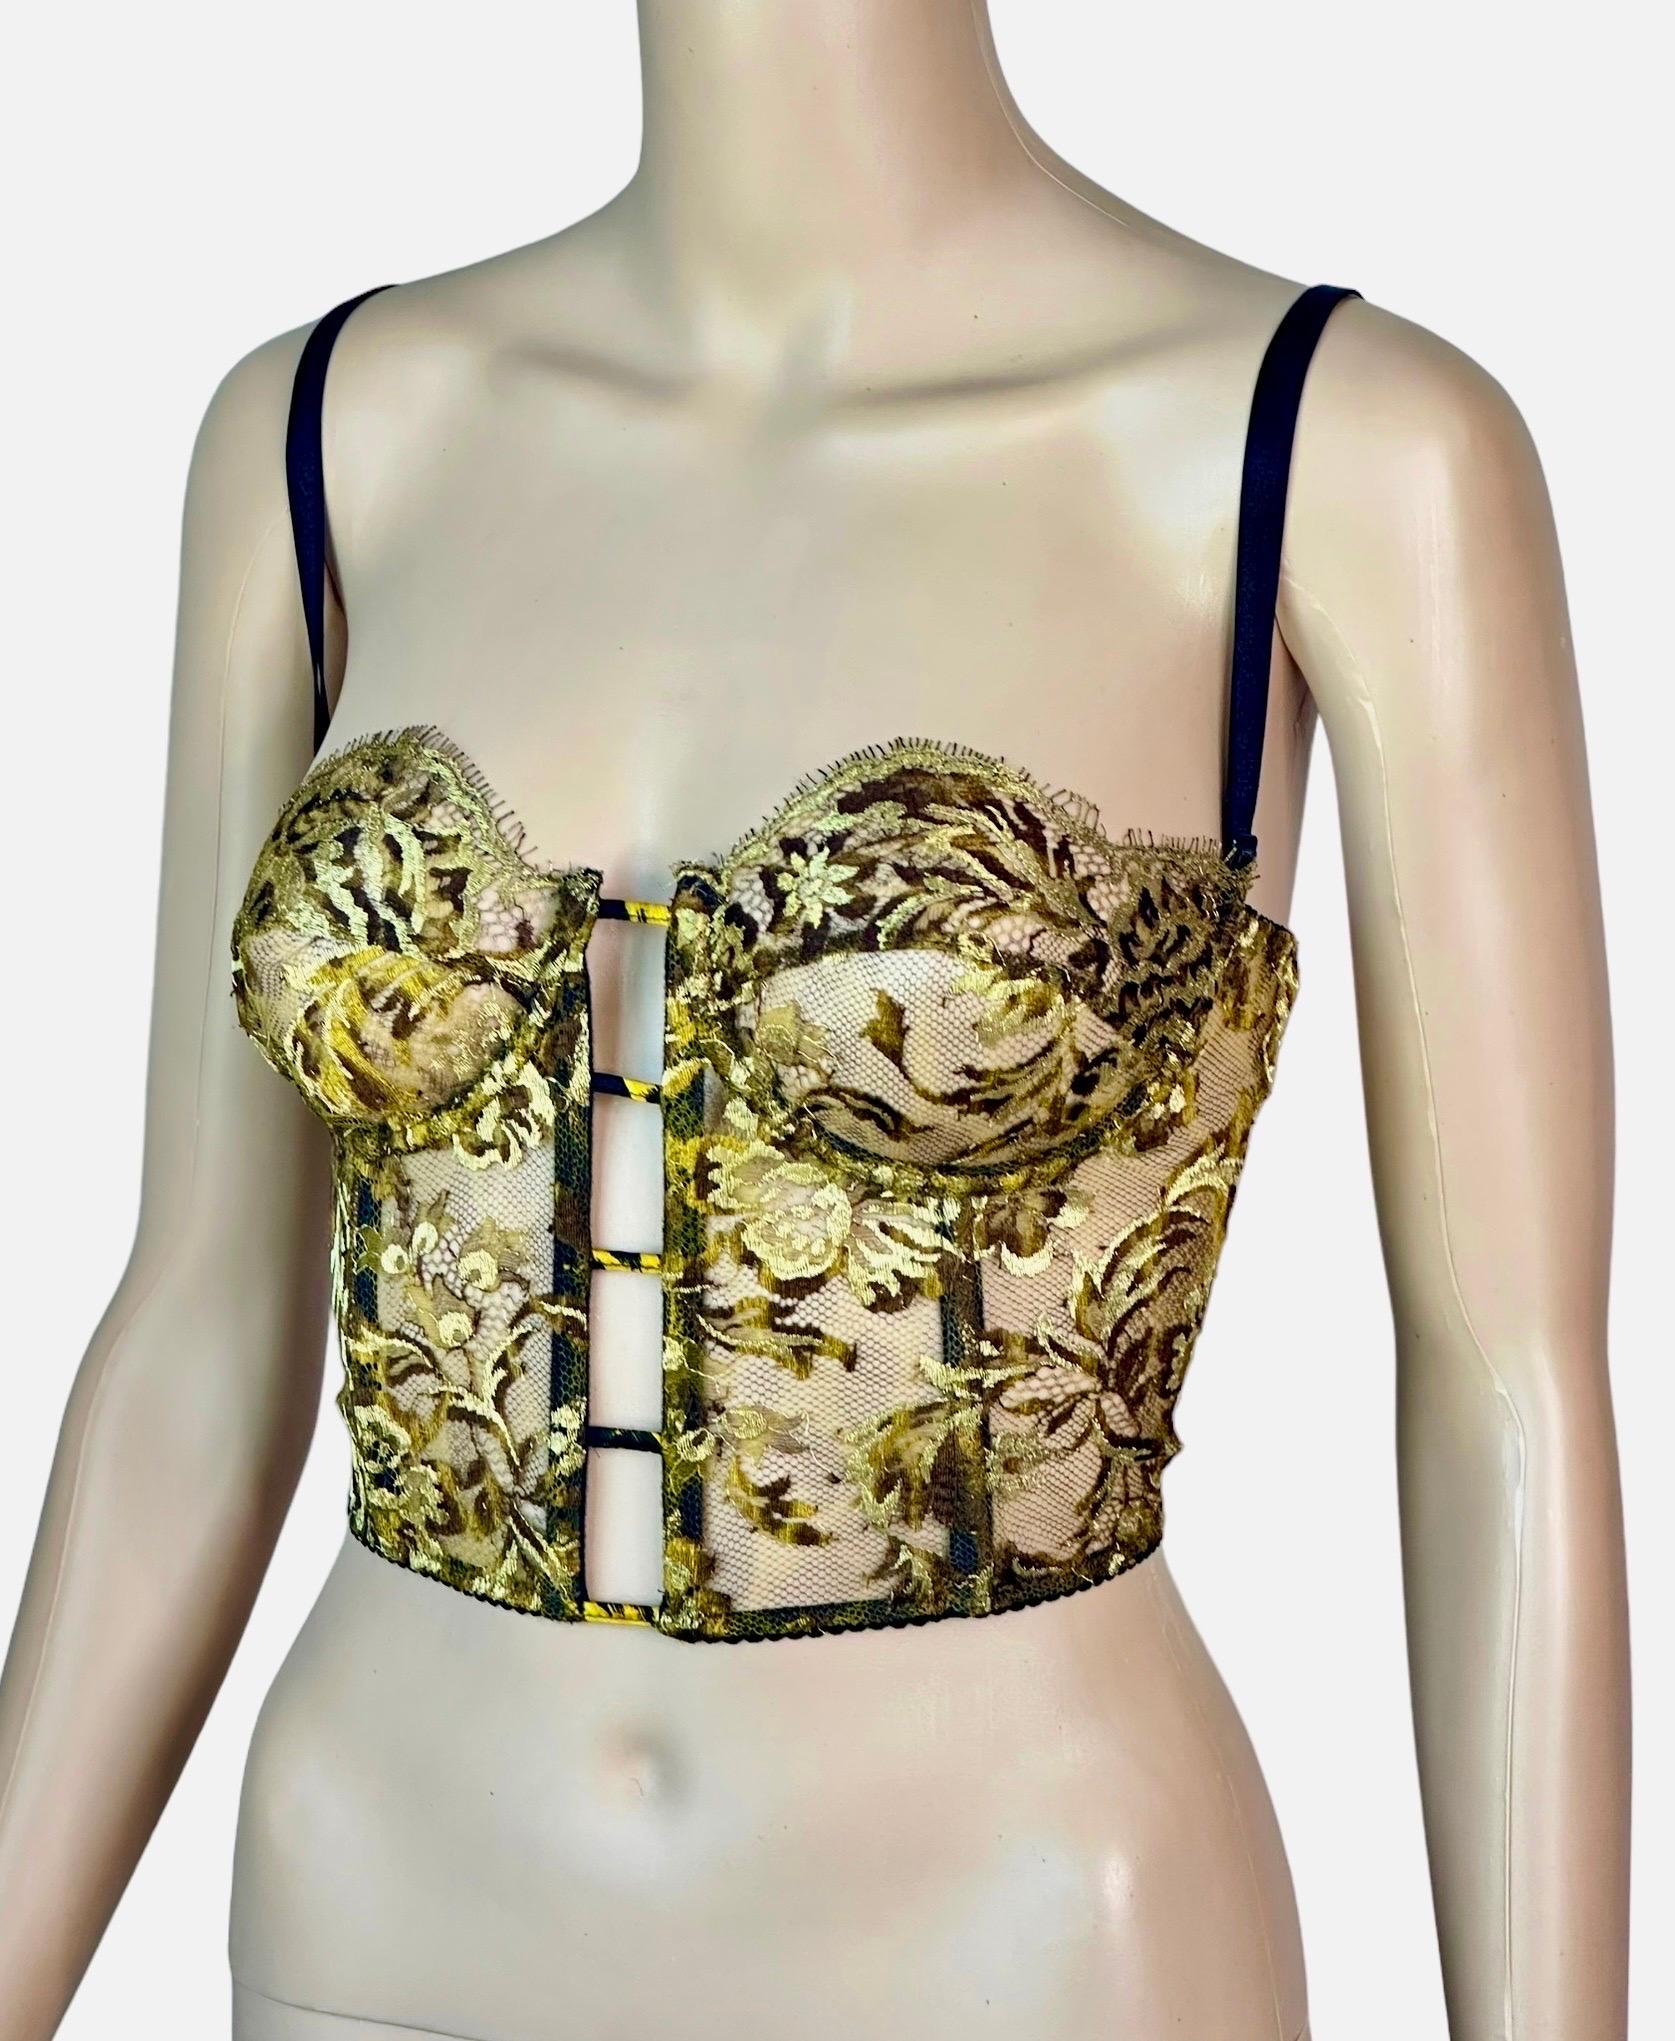 Gianni Versace Intimo S/S 1992 Unworn Sheer Gold Embroidered Lace Bustier Bra Crop Top 

Condition: New with Tags

Size: IT 46 - runs small 